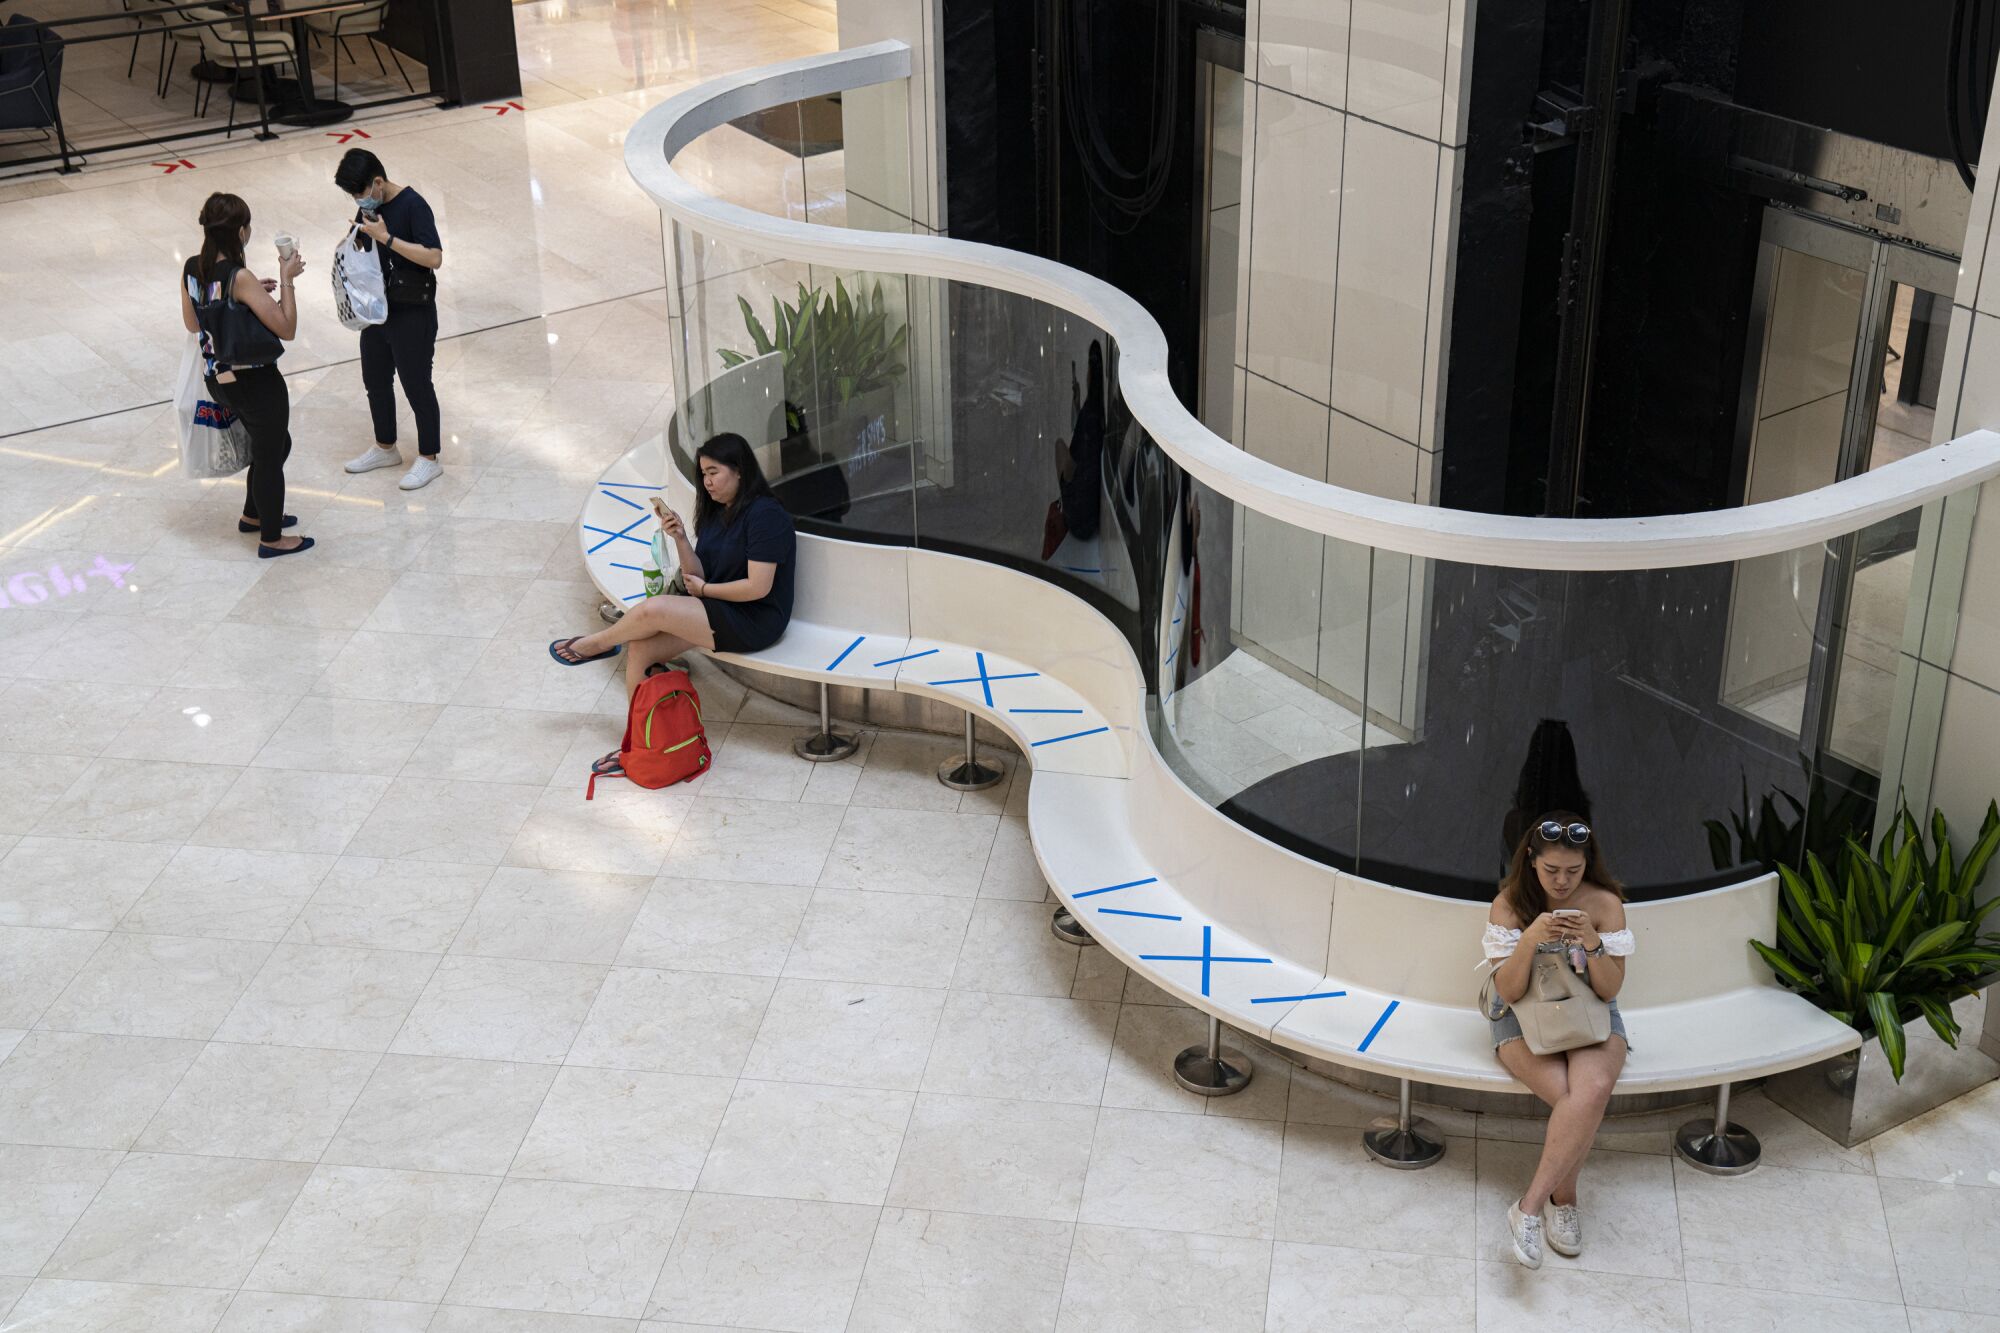 SINGAPORE: People sit along public benches at Wisma Atria shopping mall using safe-distance markers in Singapore. The government there has introduced several such measures to curb the coronavirus spread.